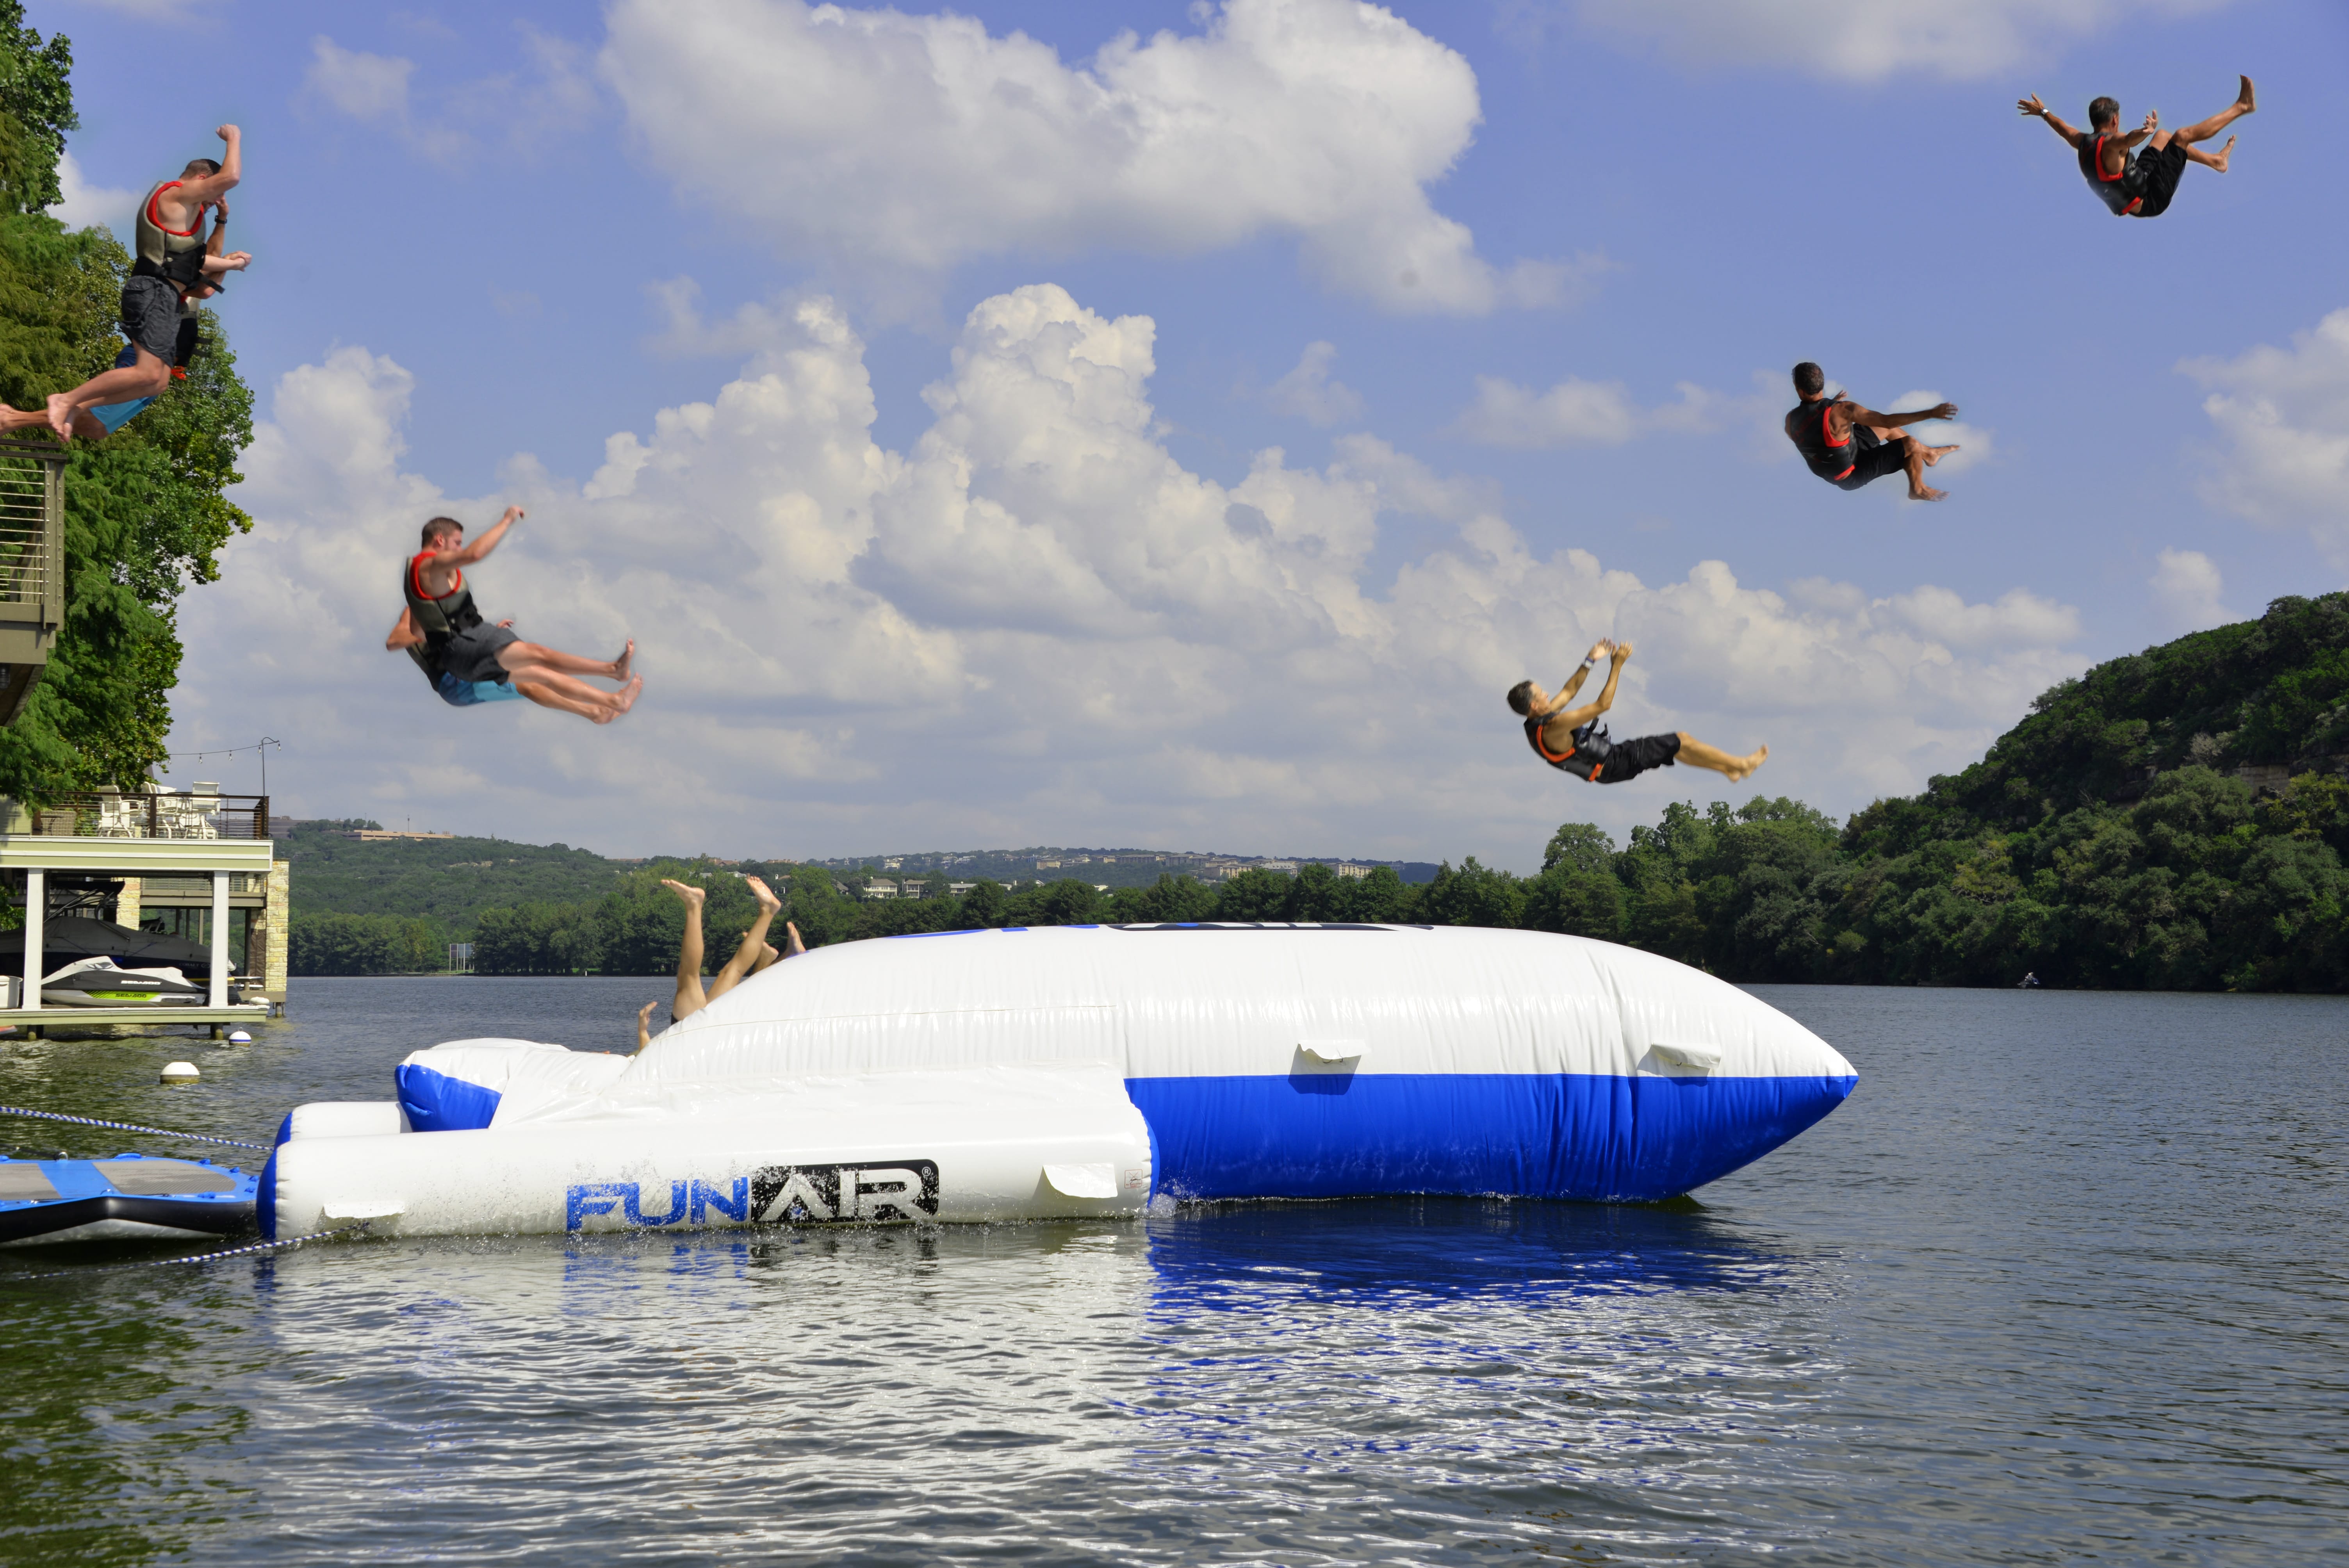 Yacht toys, inflatable air cushion at sea, person jumping onto cushion, catapulting friends into the air